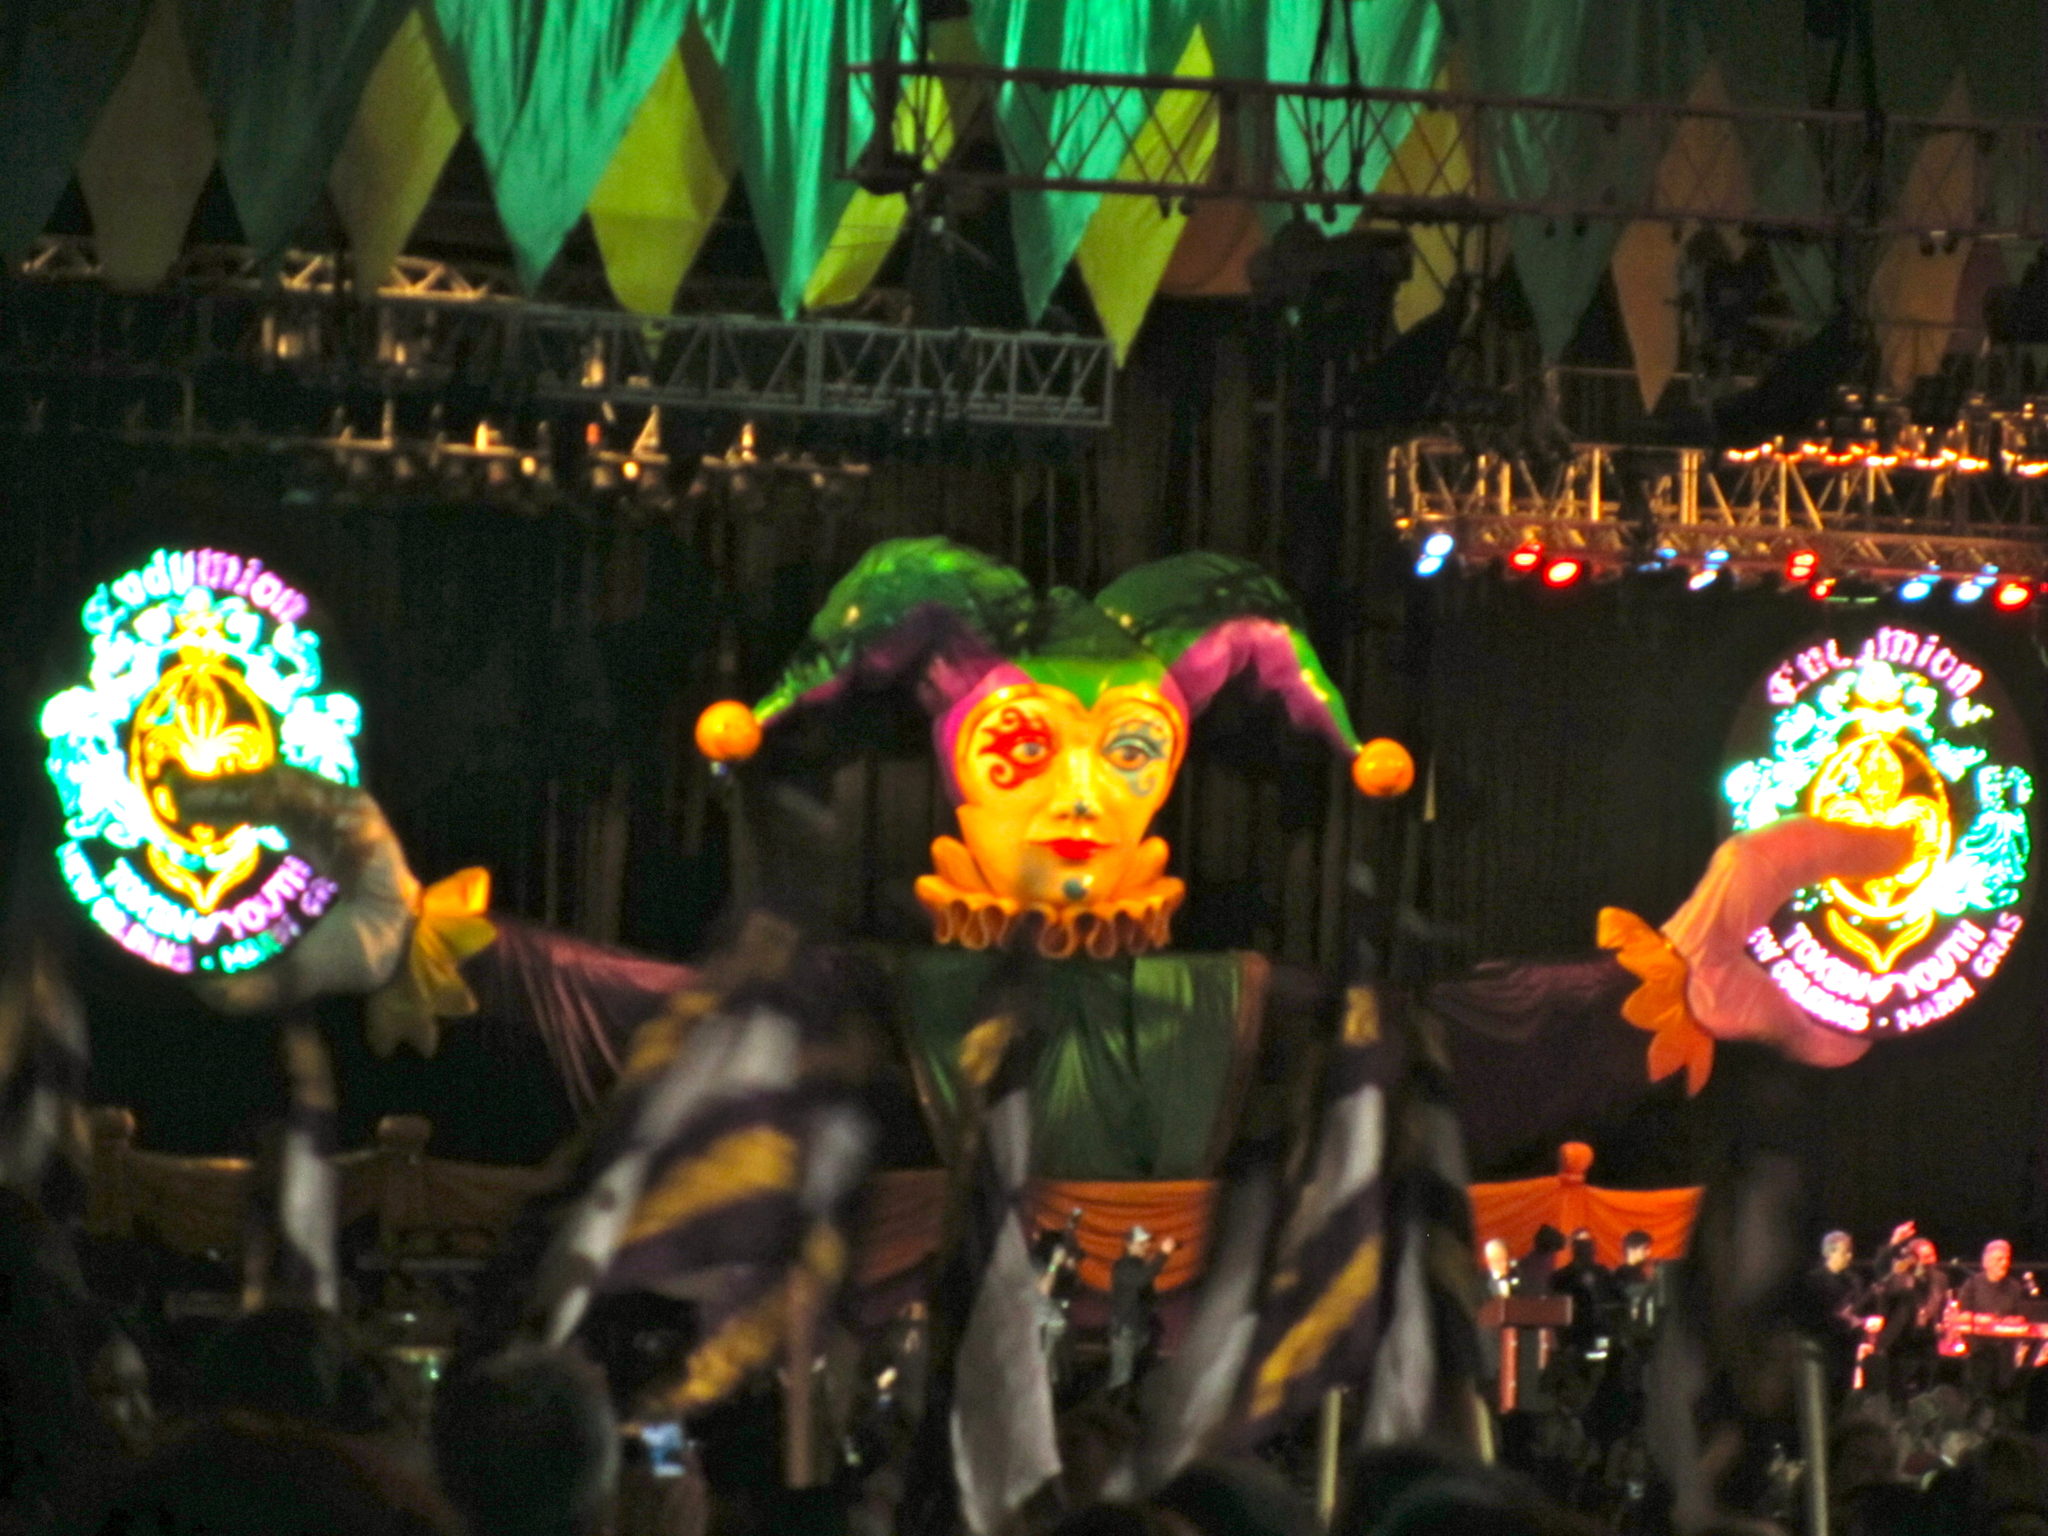 Endymion Extravaganza 2012- The Event